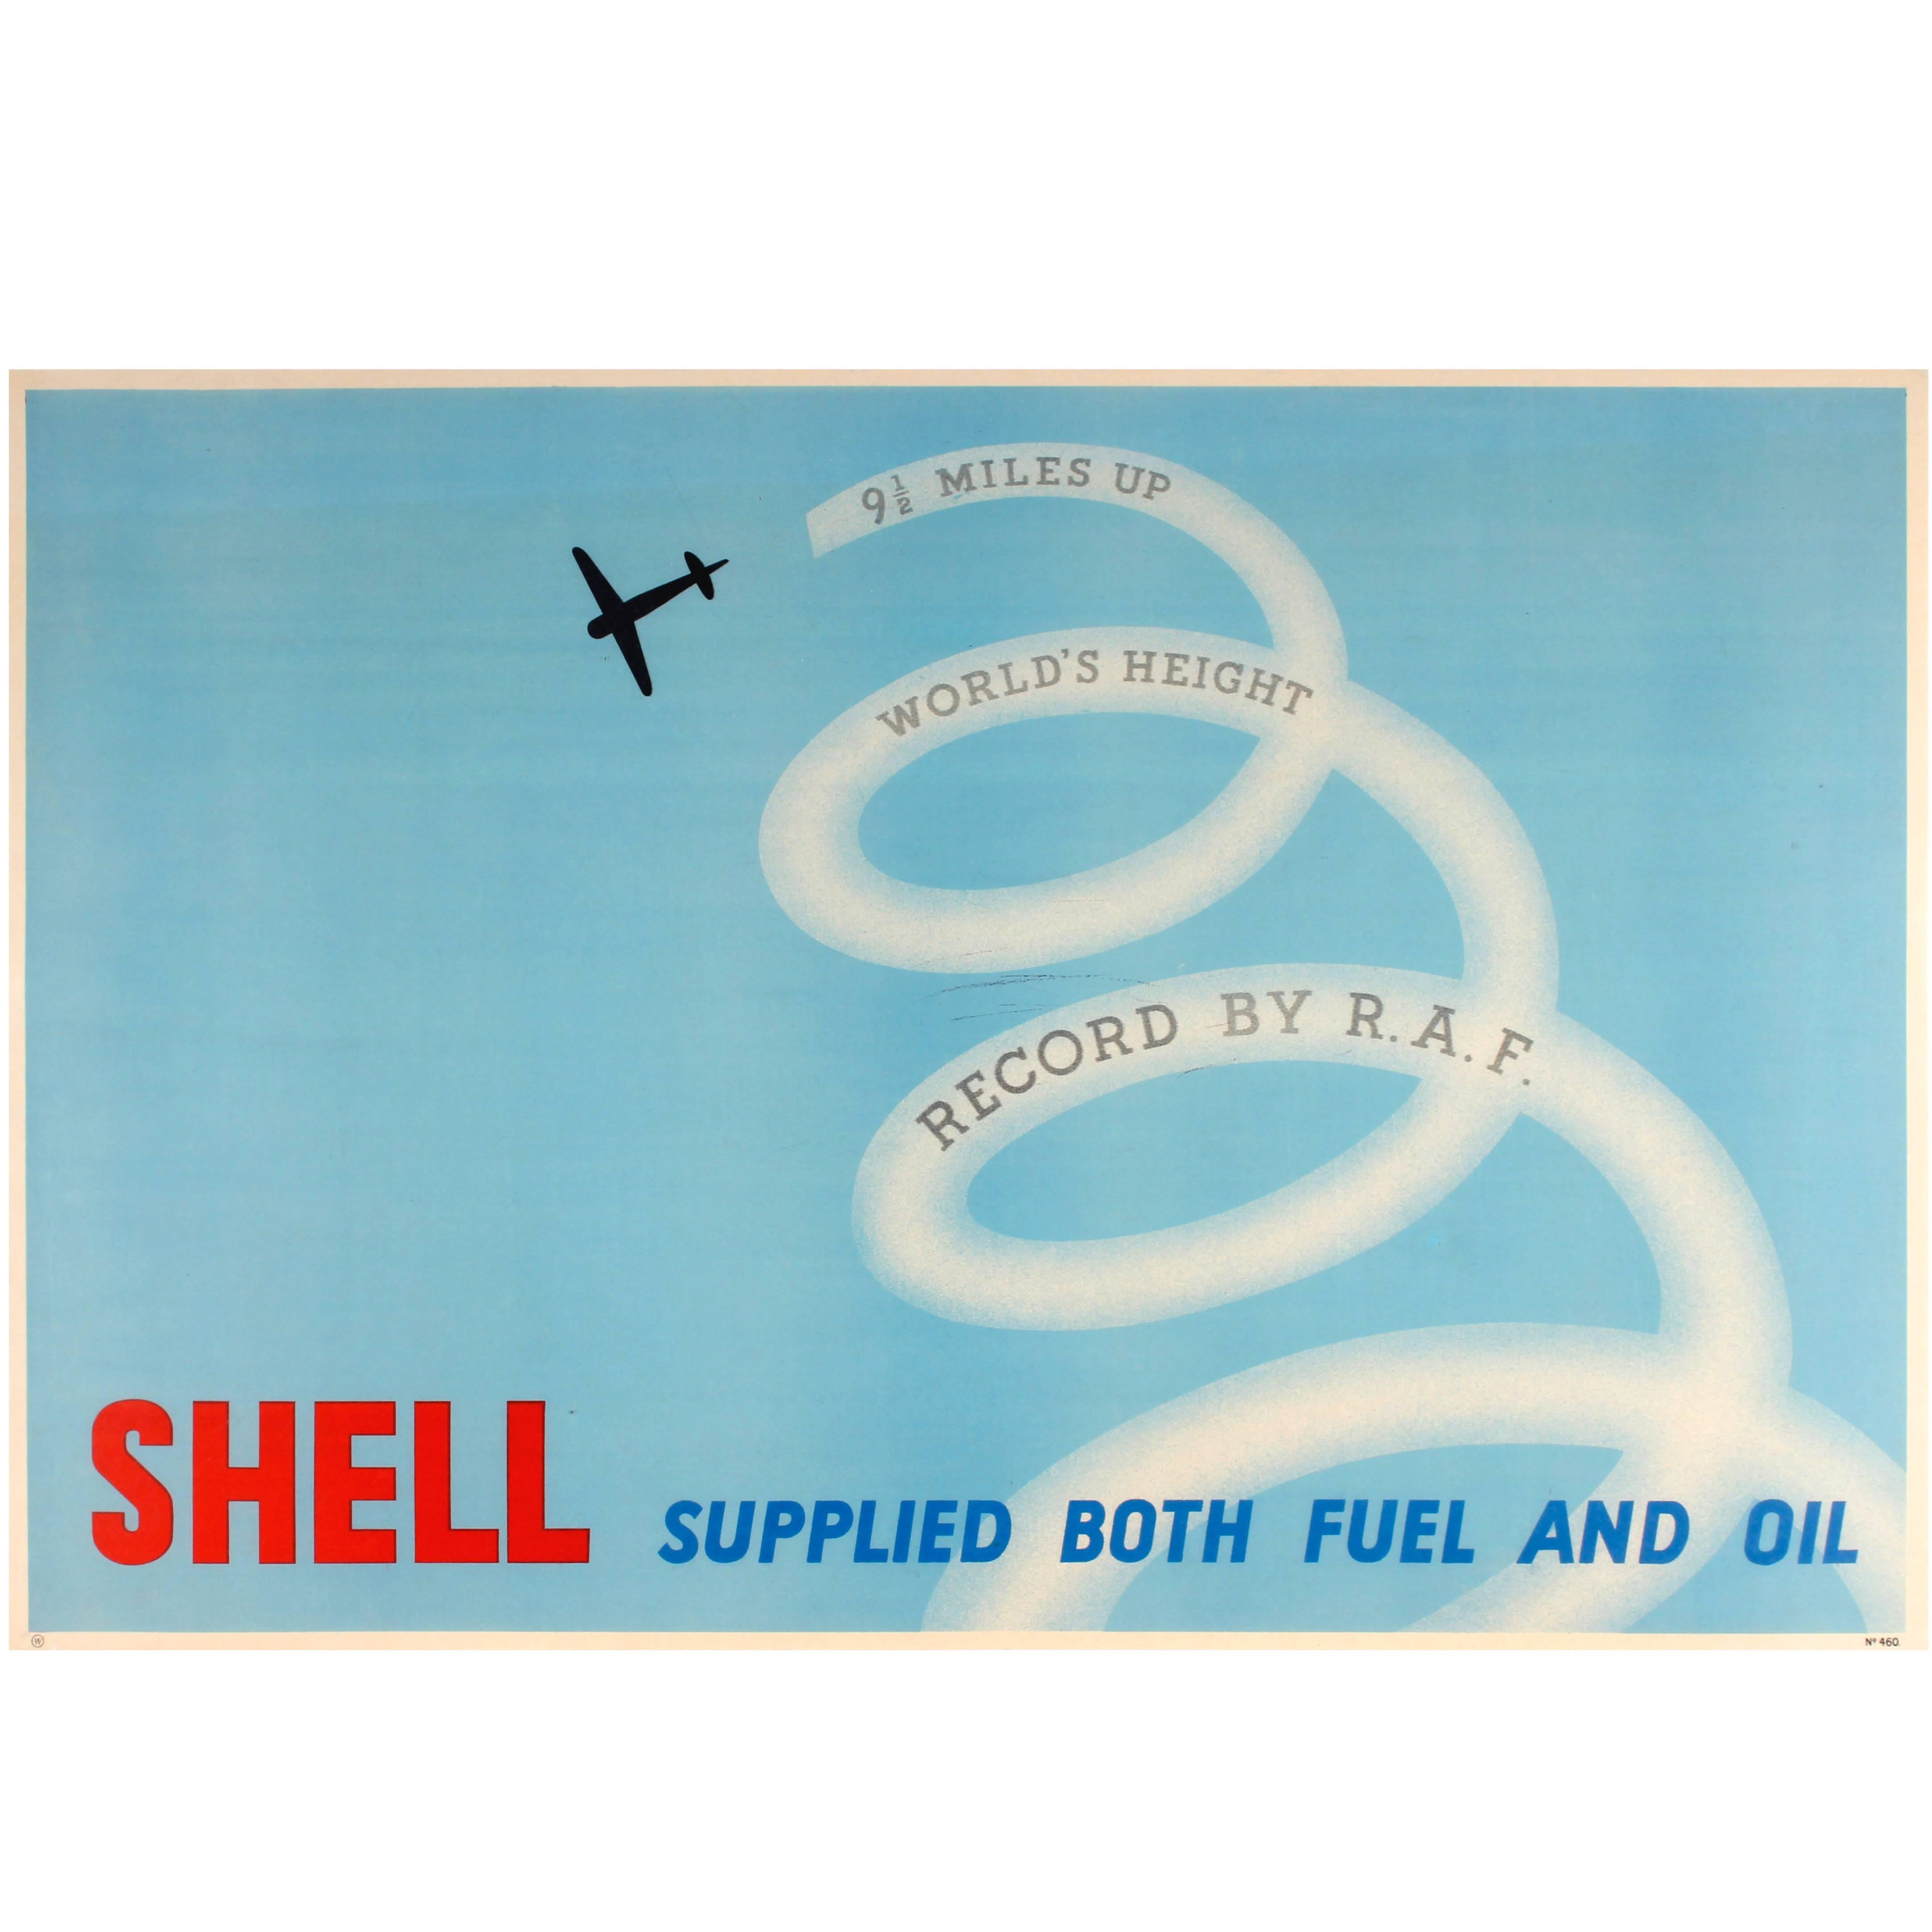 1930s Poster "9½ Miles Up World Height Record by RAF - Shell Oil & Fuel" For Sale